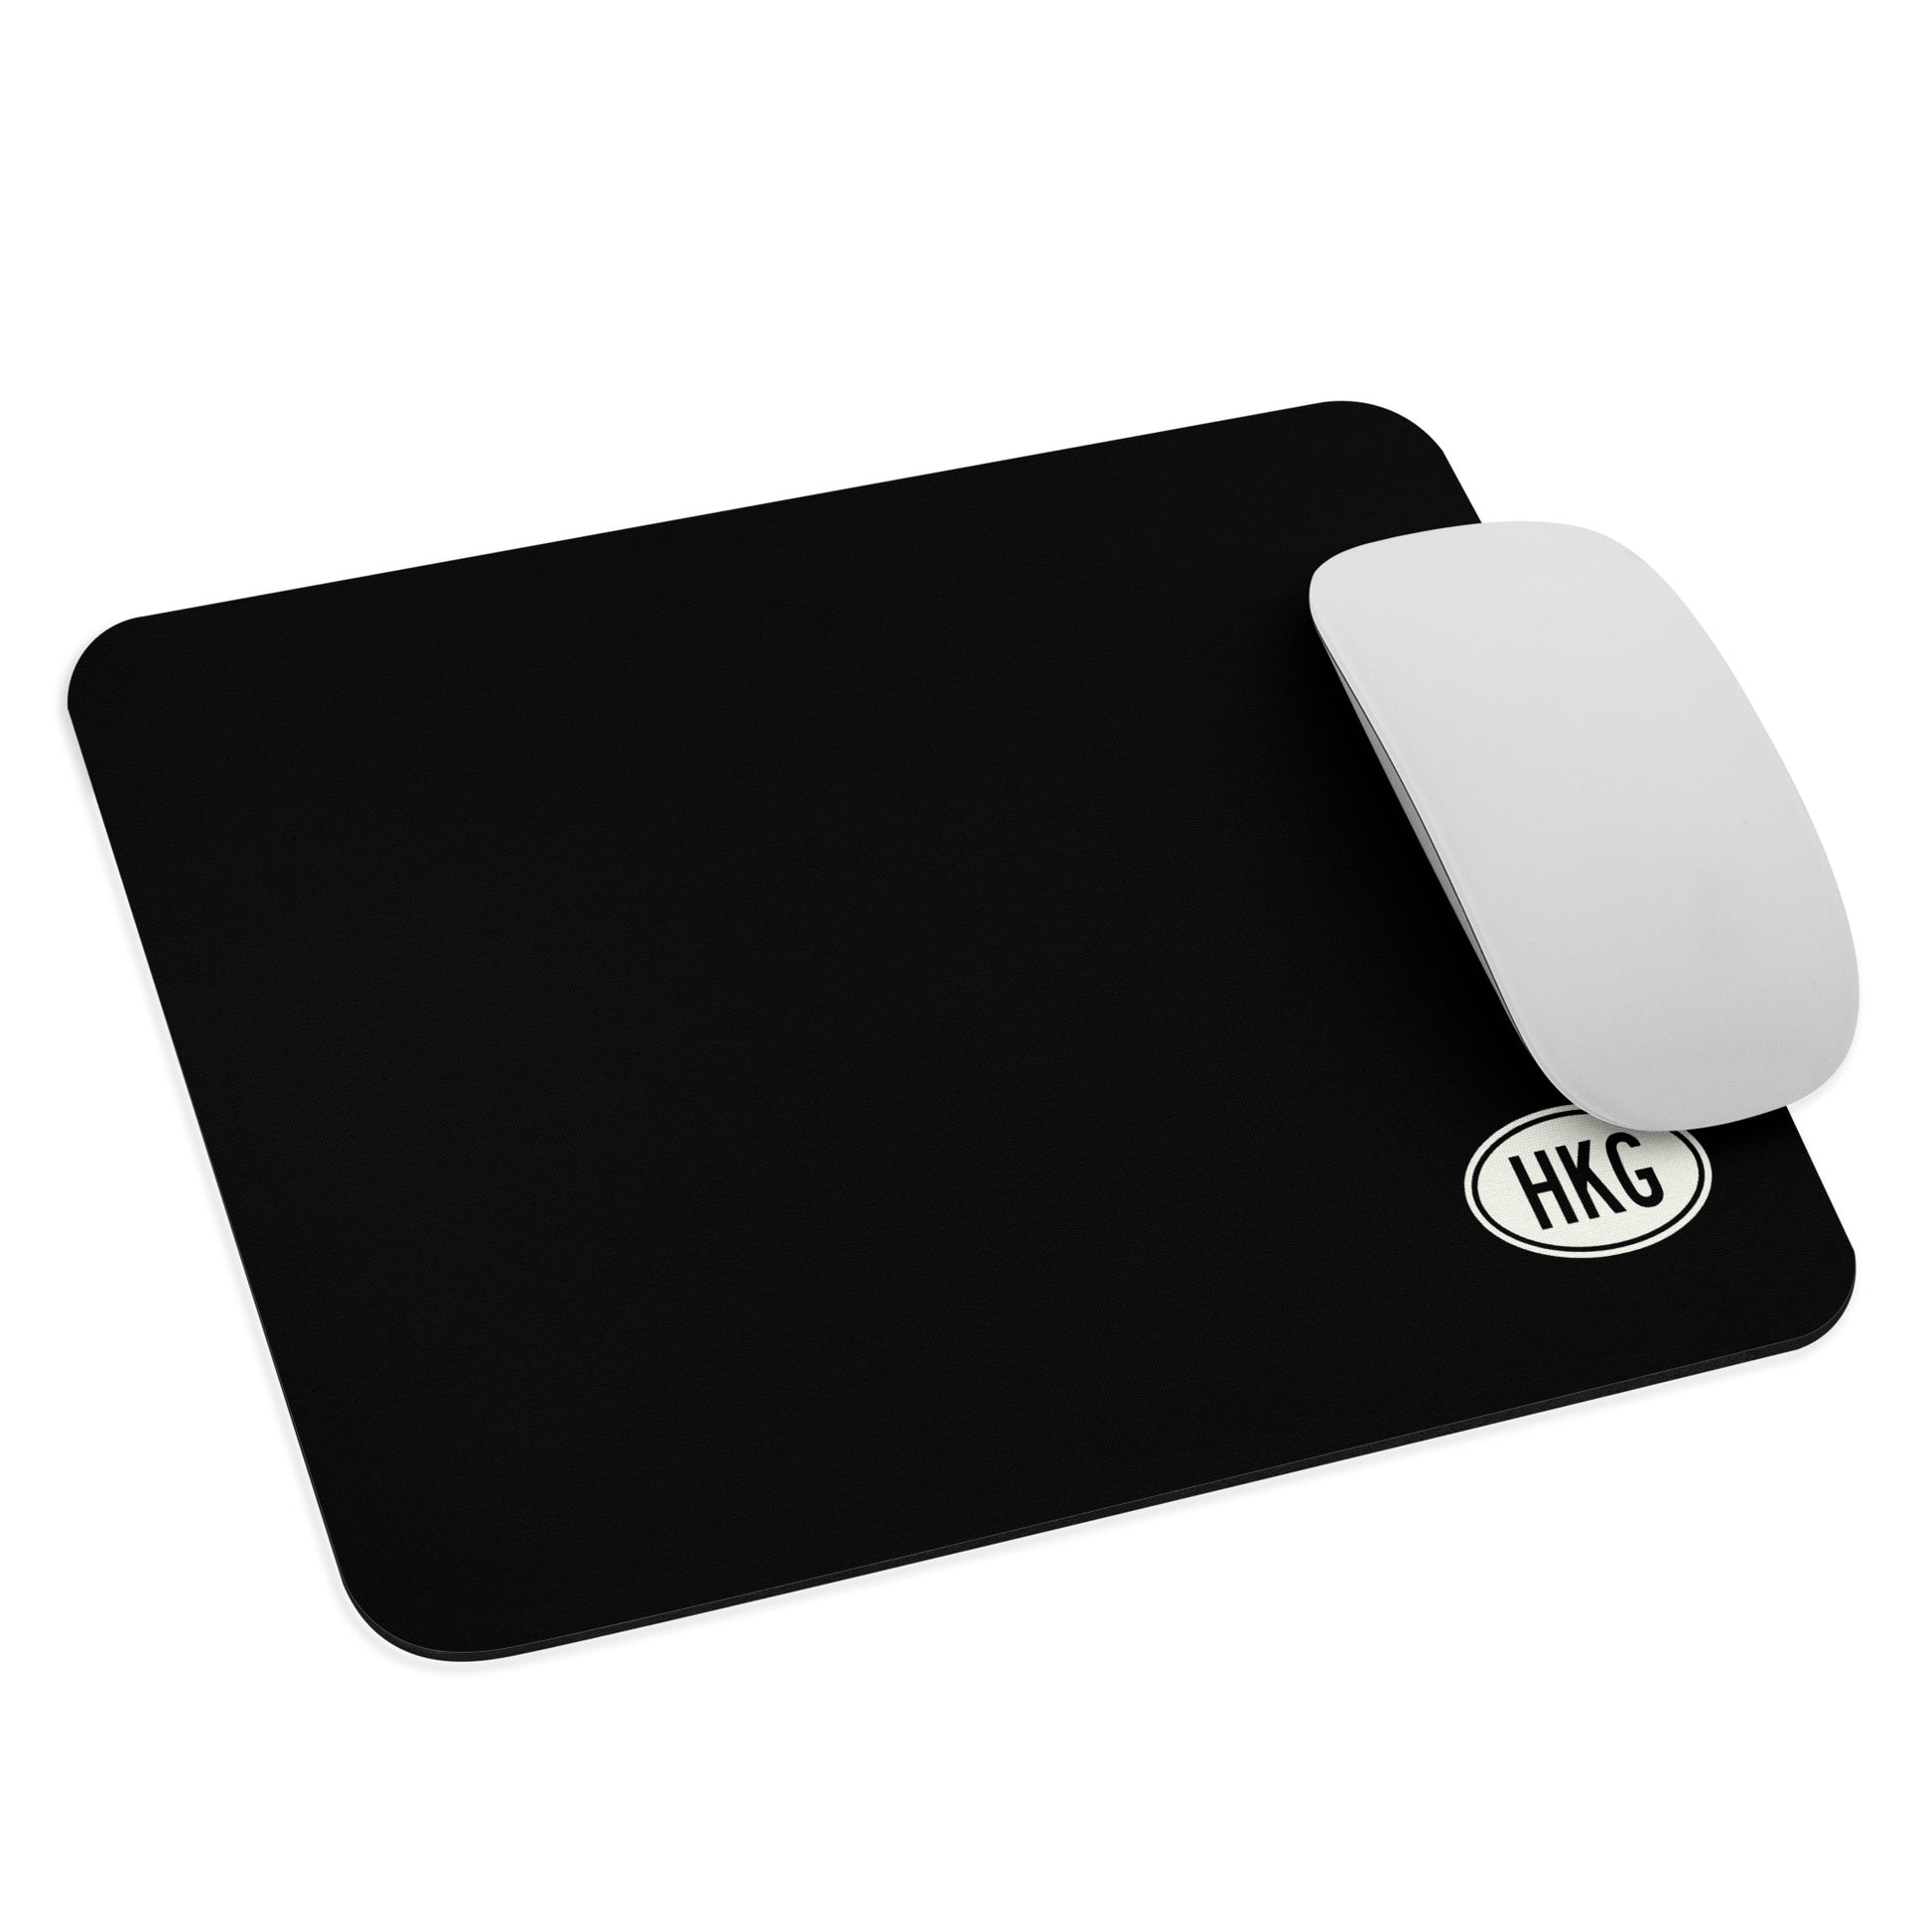 Unique Travel Gift Mouse Pad - White Oval • HKG Hong Kong • YHM Designs - Image 03